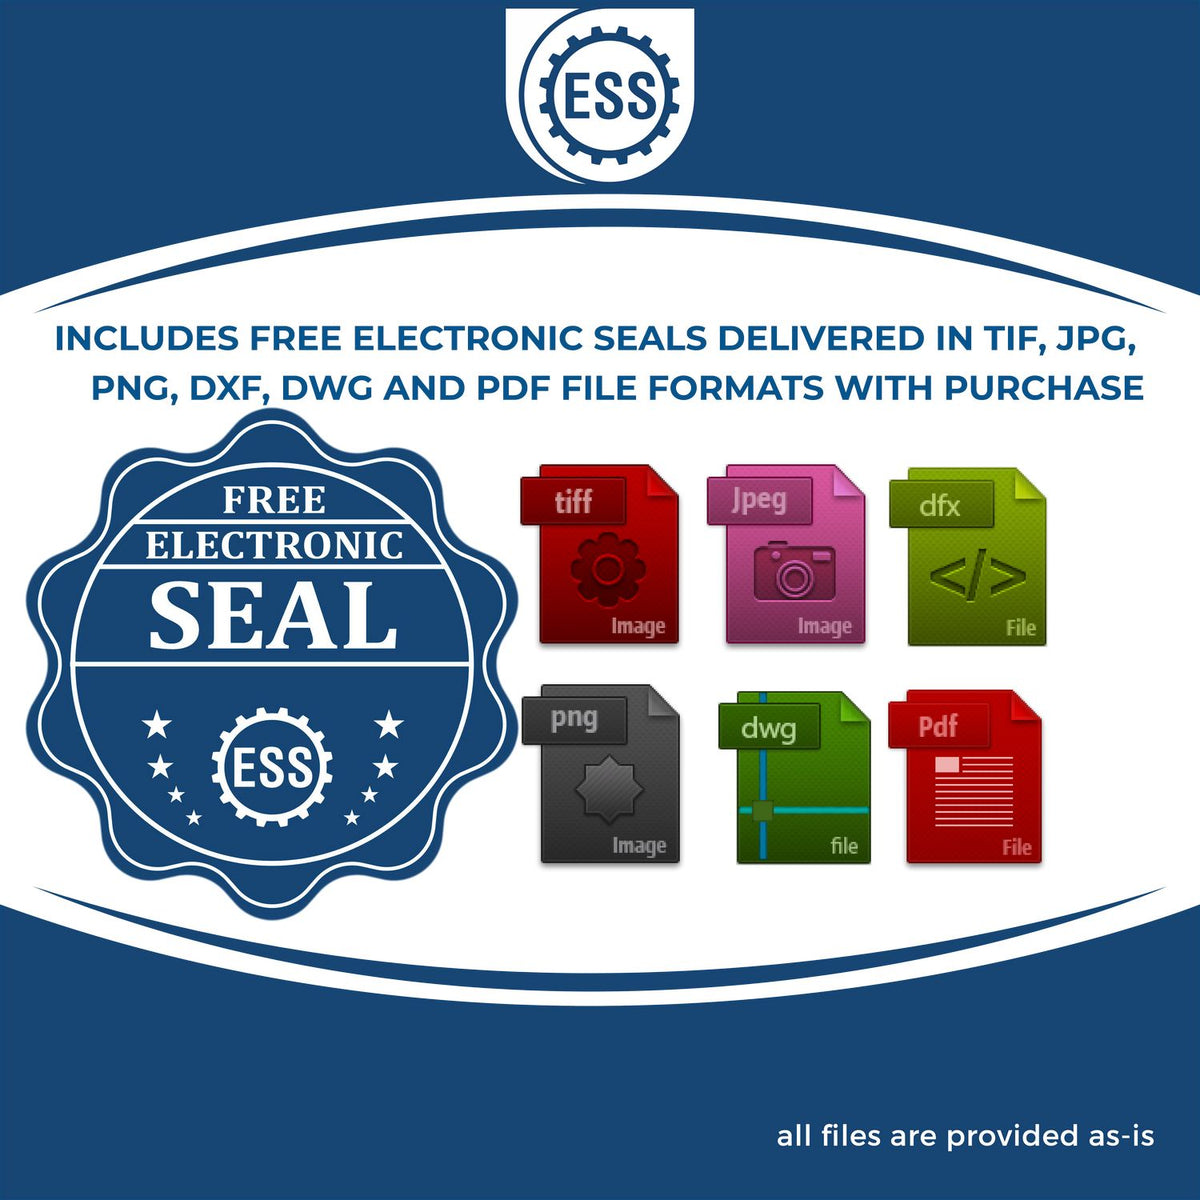 An infographic for the free electronic seal for the Premium MaxLight Pre-Inked Tennessee Geology Stamp illustrating the different file type icons such as DXF, DWG, TIF, JPG and PNG.